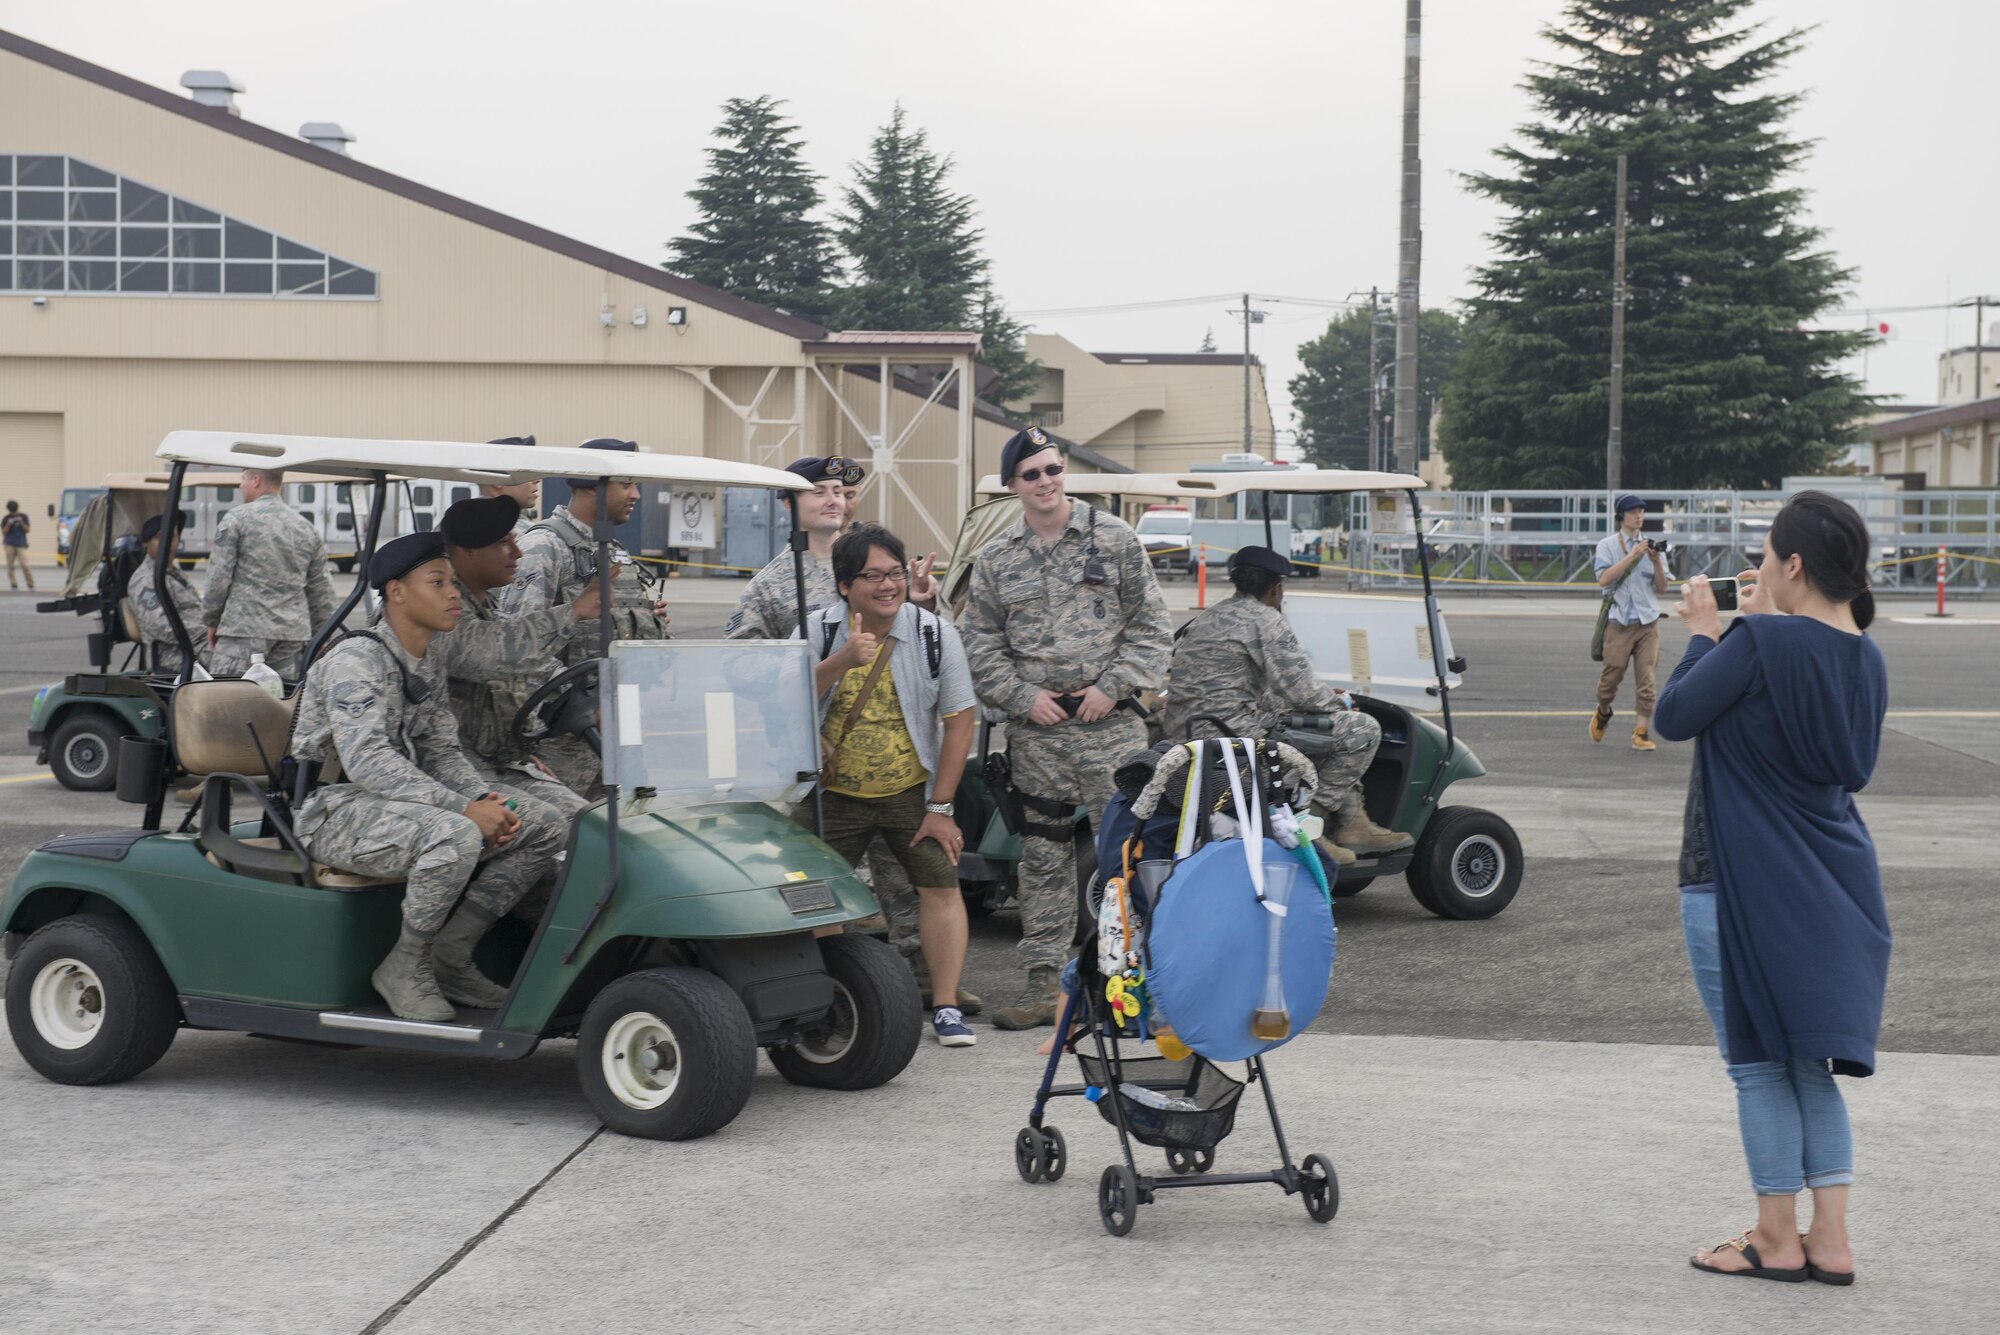 A Japanese man poses for a photo with members of the 374th Security Forces Squadron during the 2016 Friendship Festival at Yokota Air Base, Japan, Sept. 17, 2016. The festival was an opportunity for visitors to experience American culture, while strengthening the bonds between Yokota and the local communities. (U.S. Air Force photo by Senior Airman David C. Danford/Released)